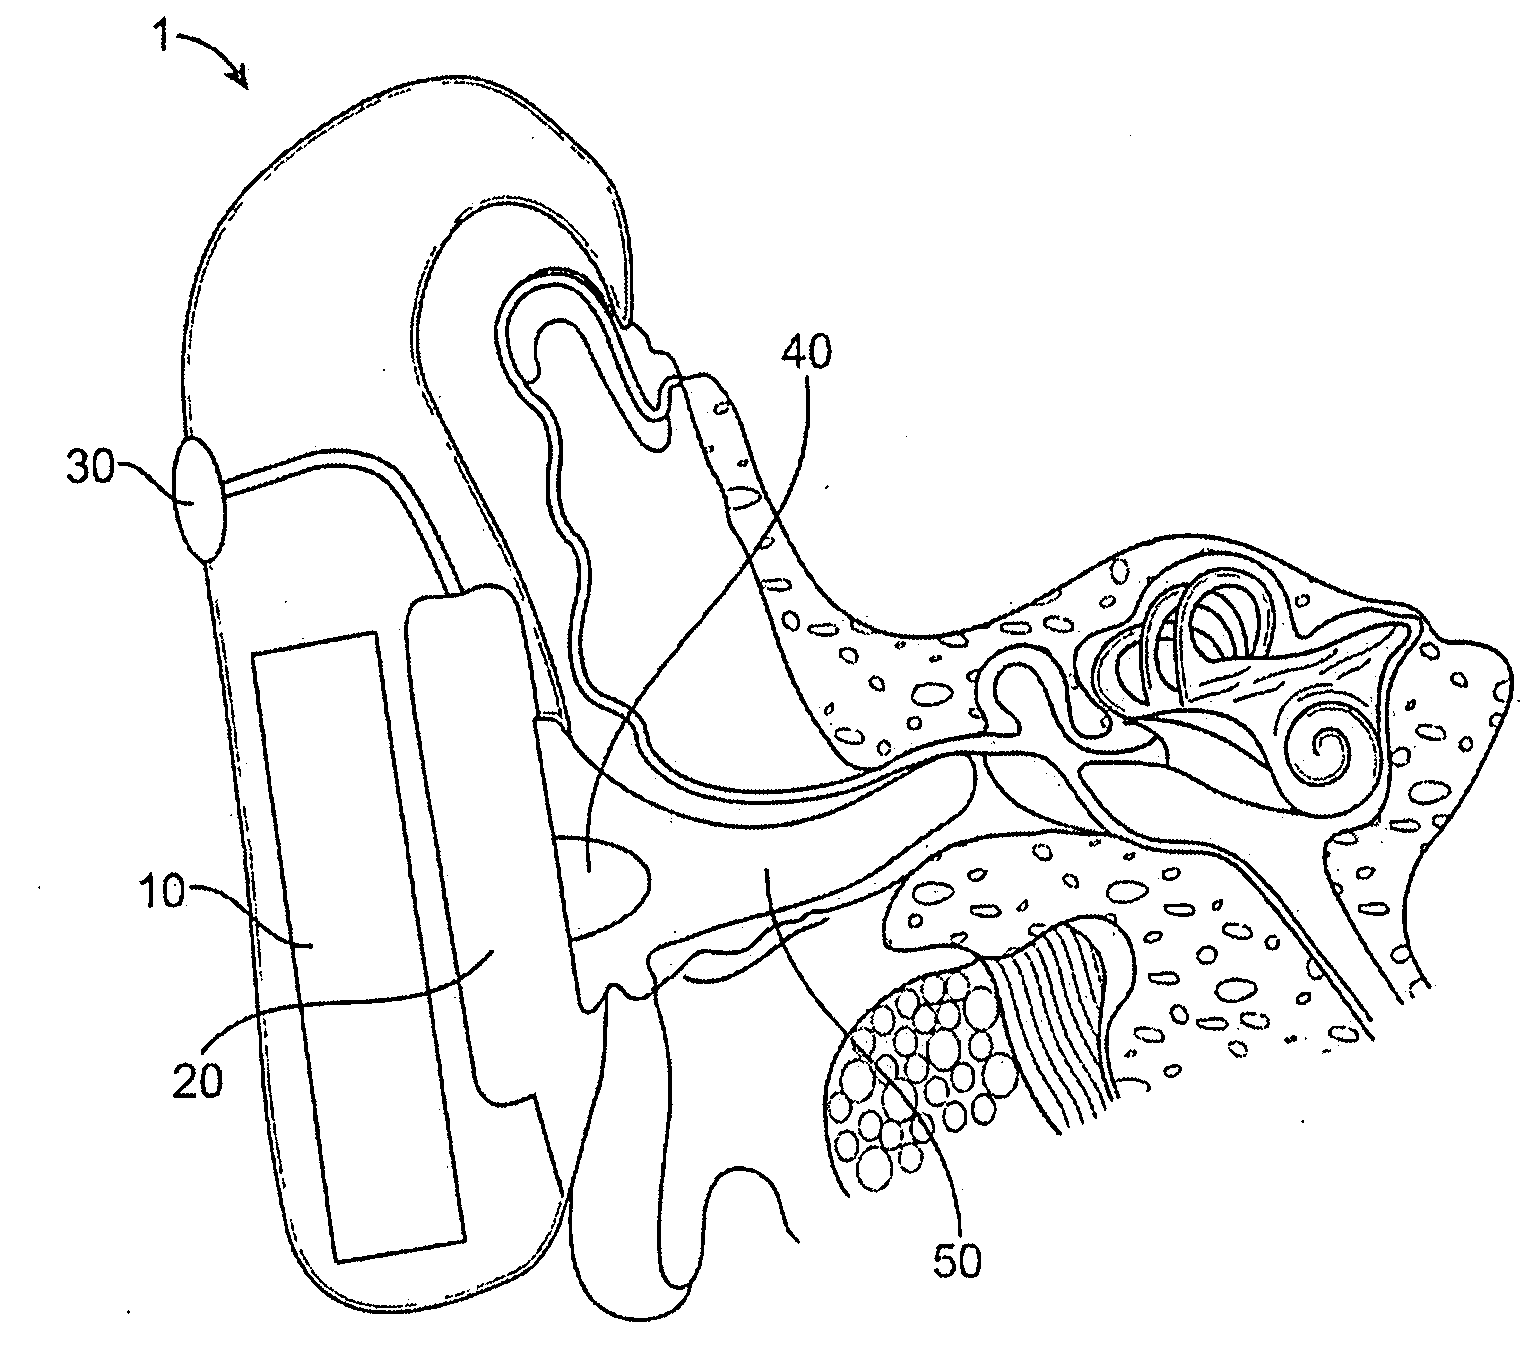 Optical ear infection treatment device and method